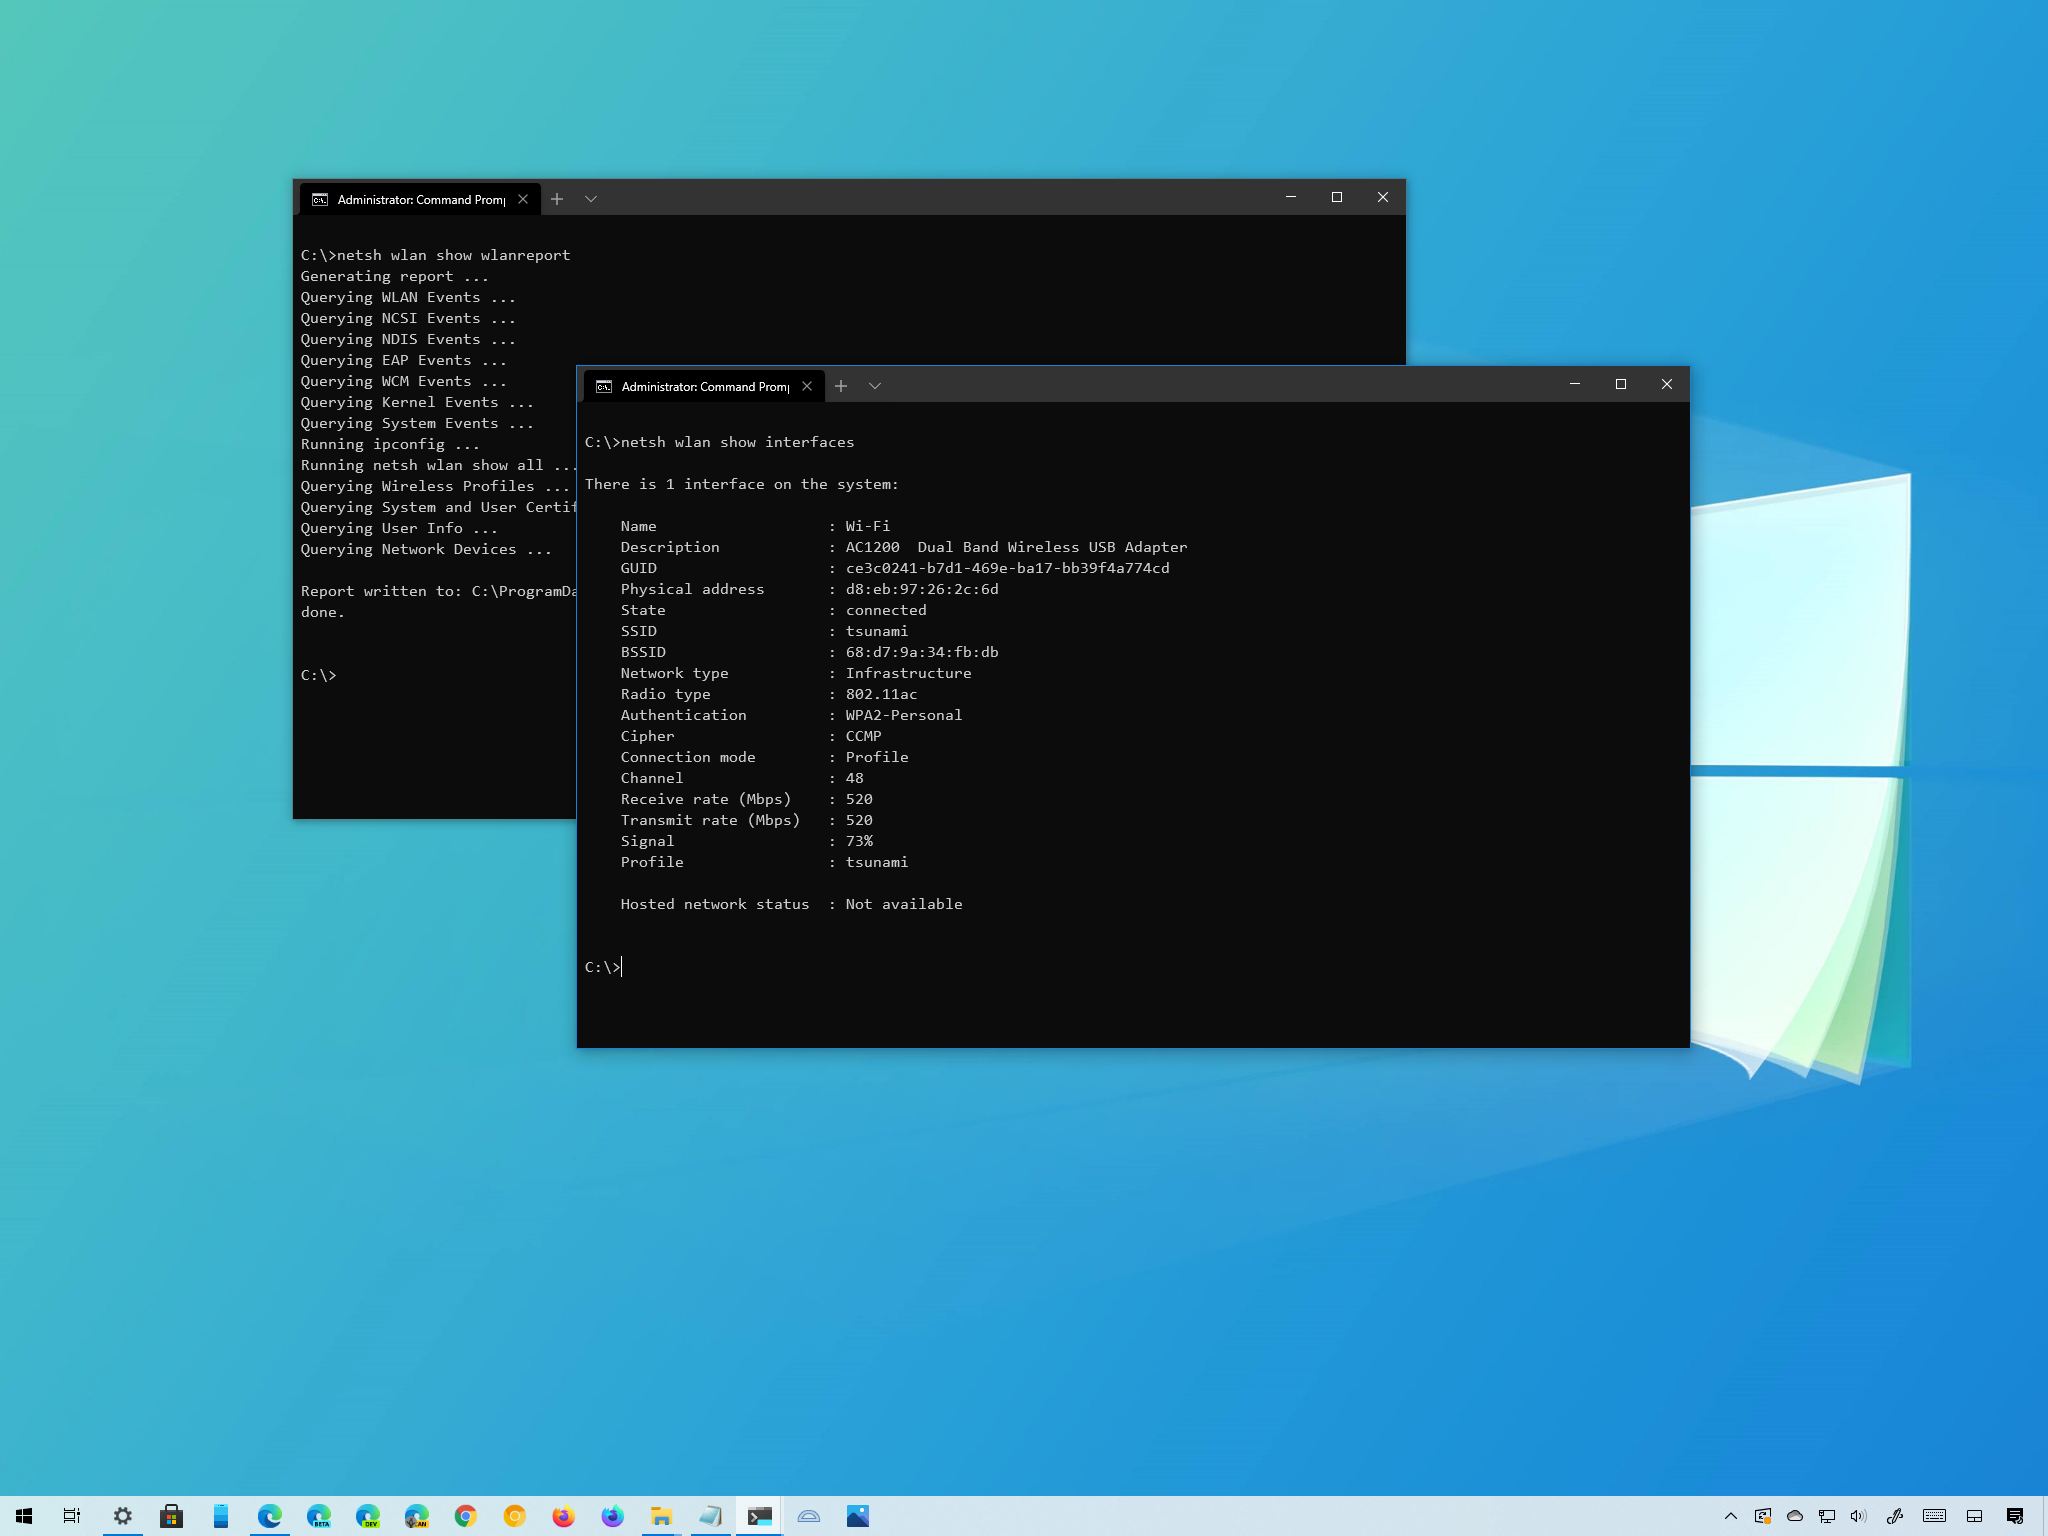 Windows 10 manage Wi-Fi with netsh command